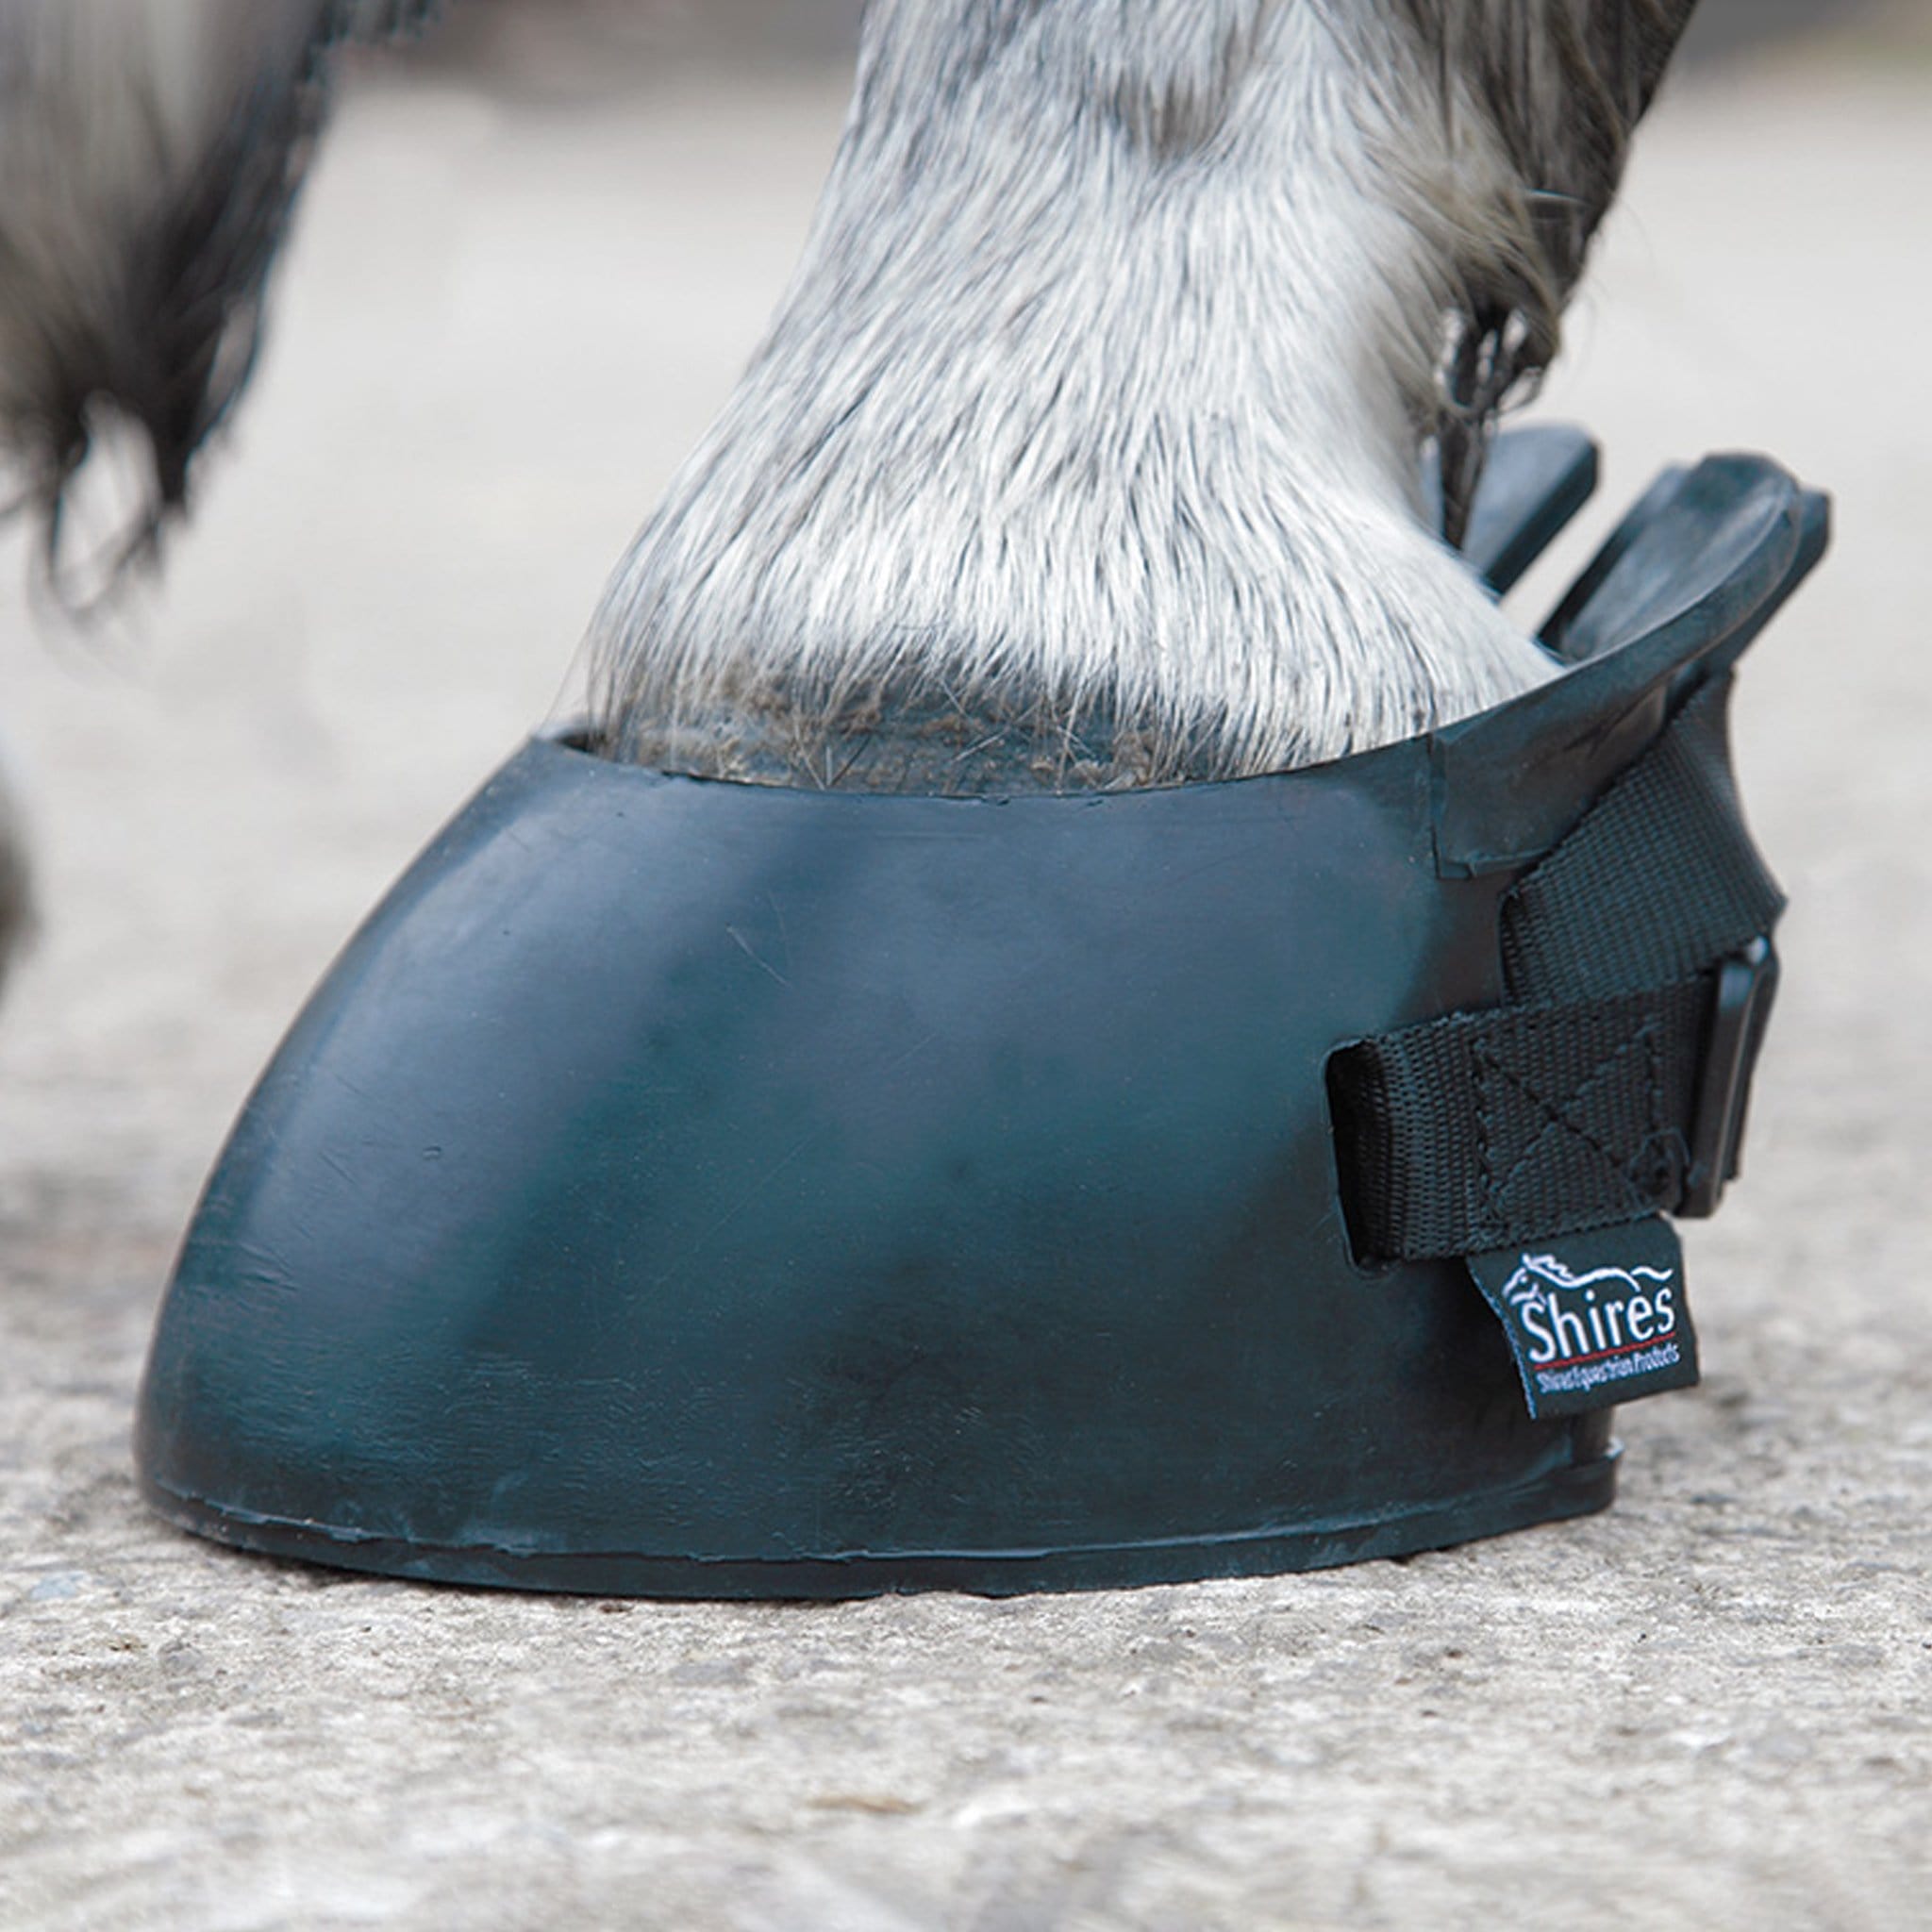 Shires Temporary Shoe Boot 1847 Black